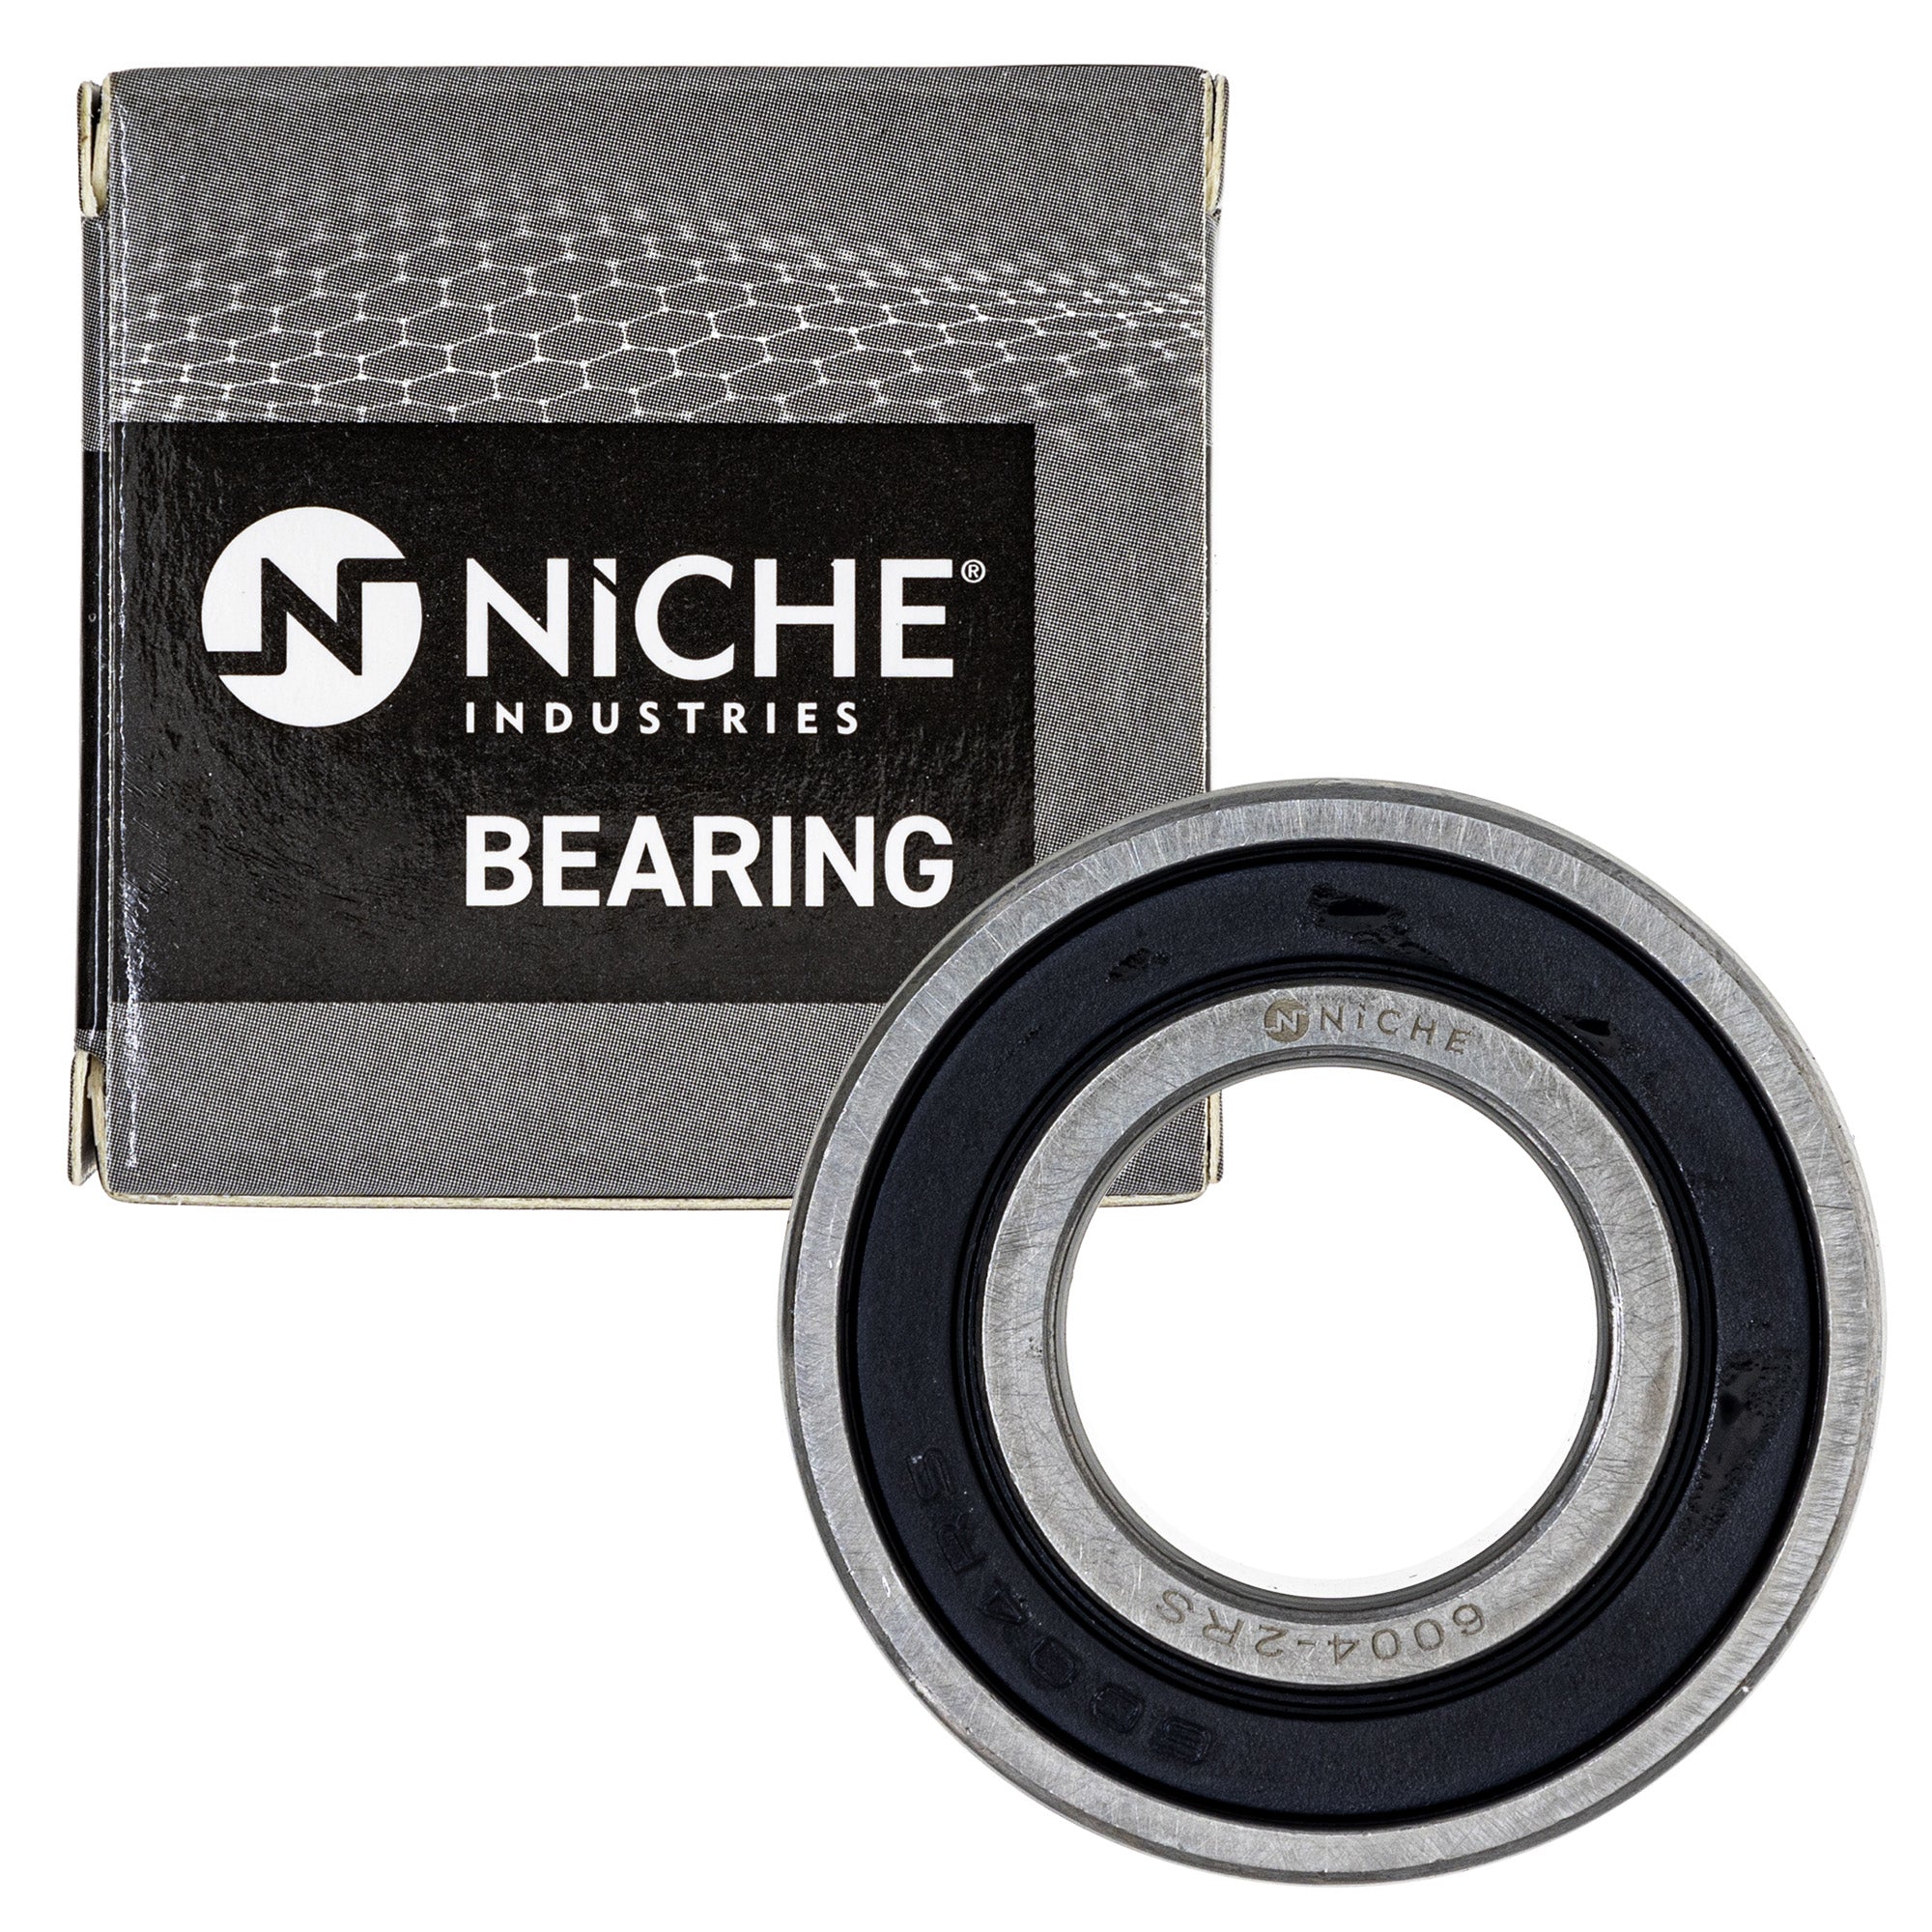 NICHE MK1009129 Wheel Bearing Seal Kit for zOTHER Ref No RM250